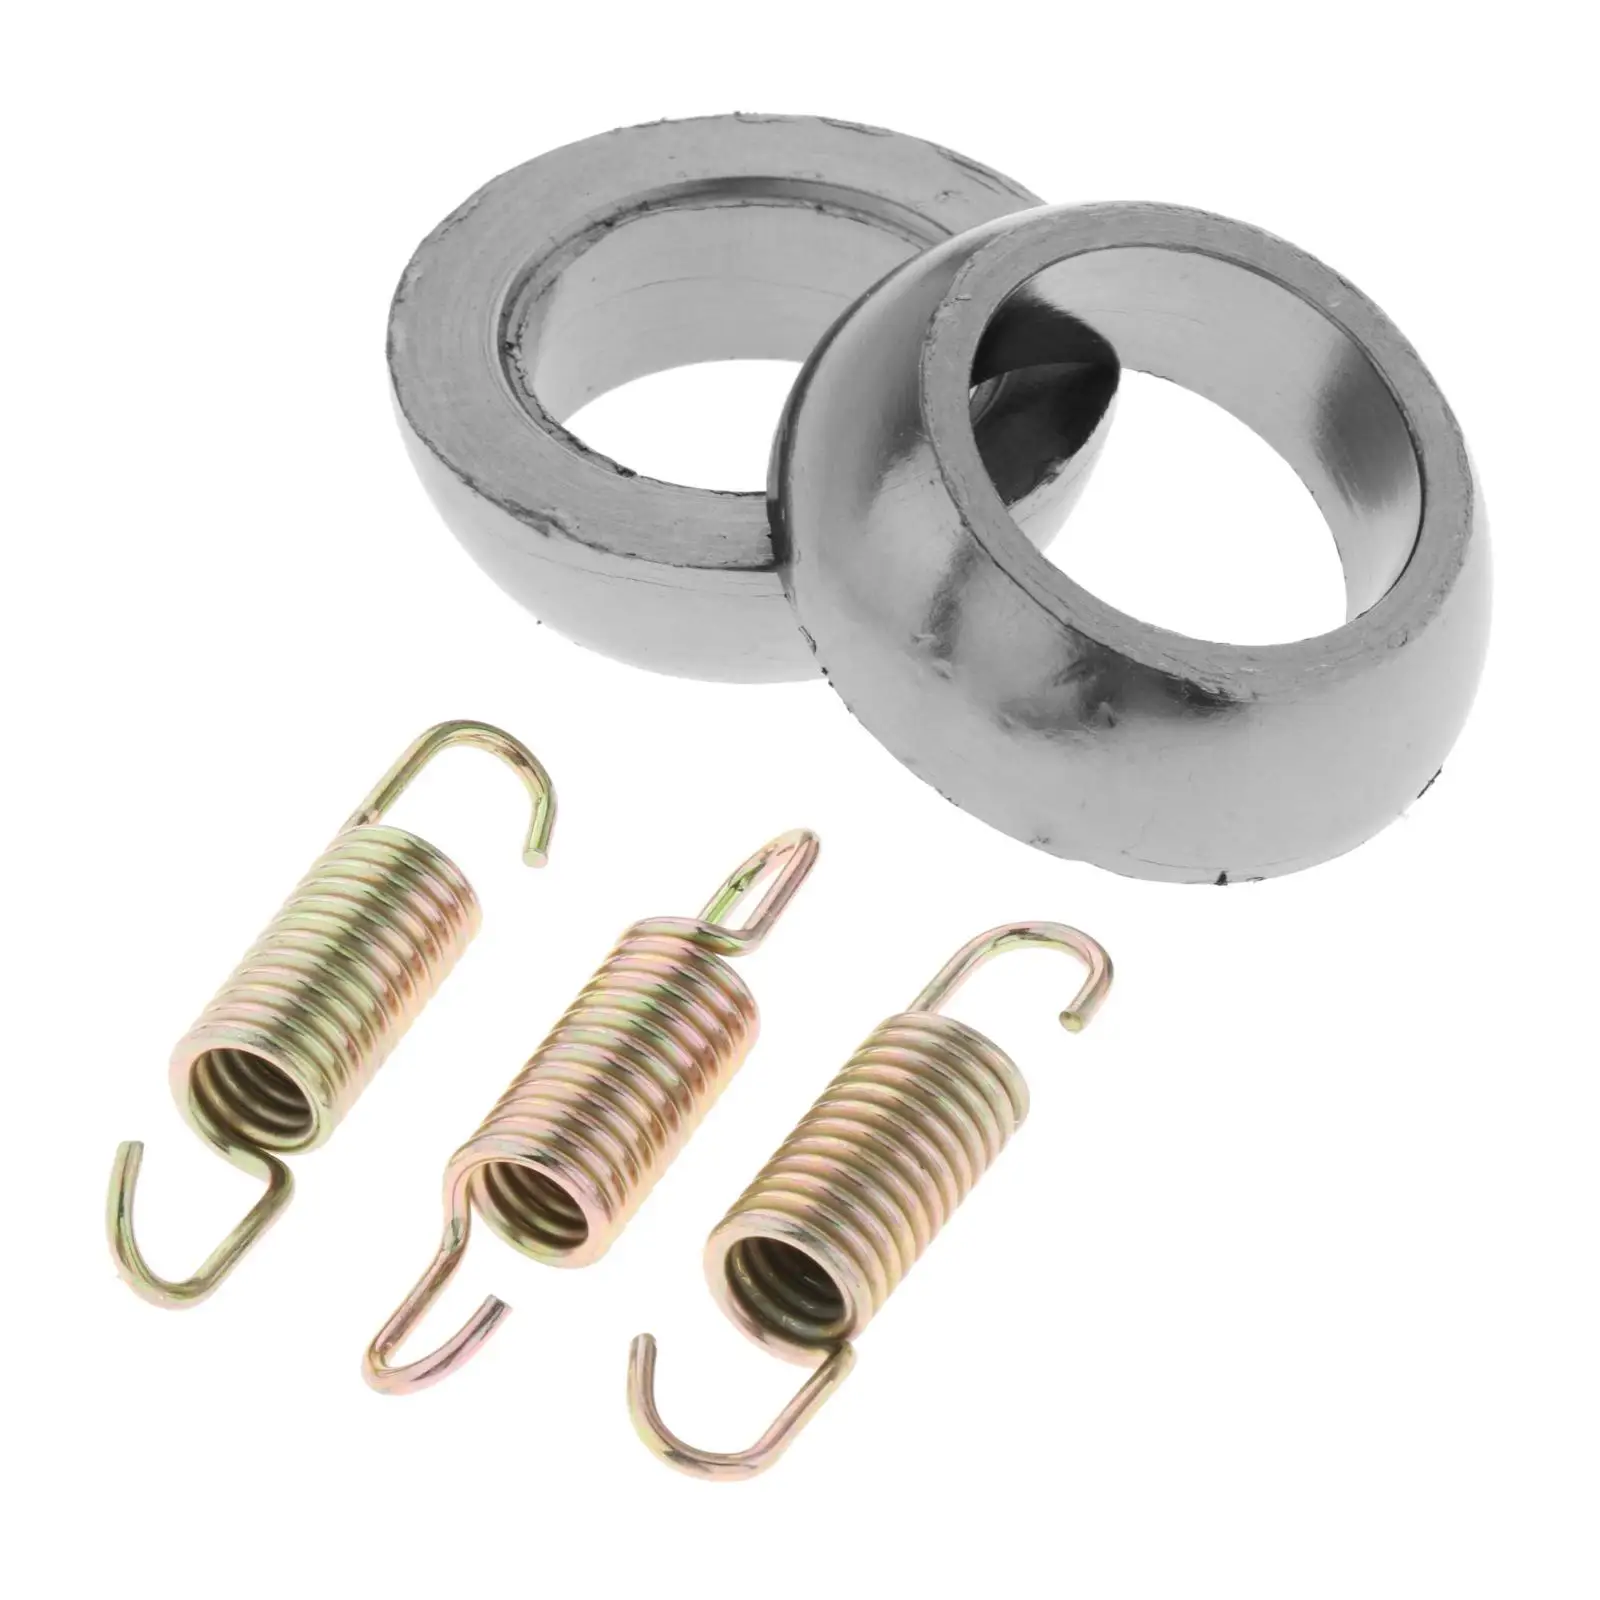 Exhaust Gasket & Spring Kit ATV Parts Replacement for Arctic Cat 300